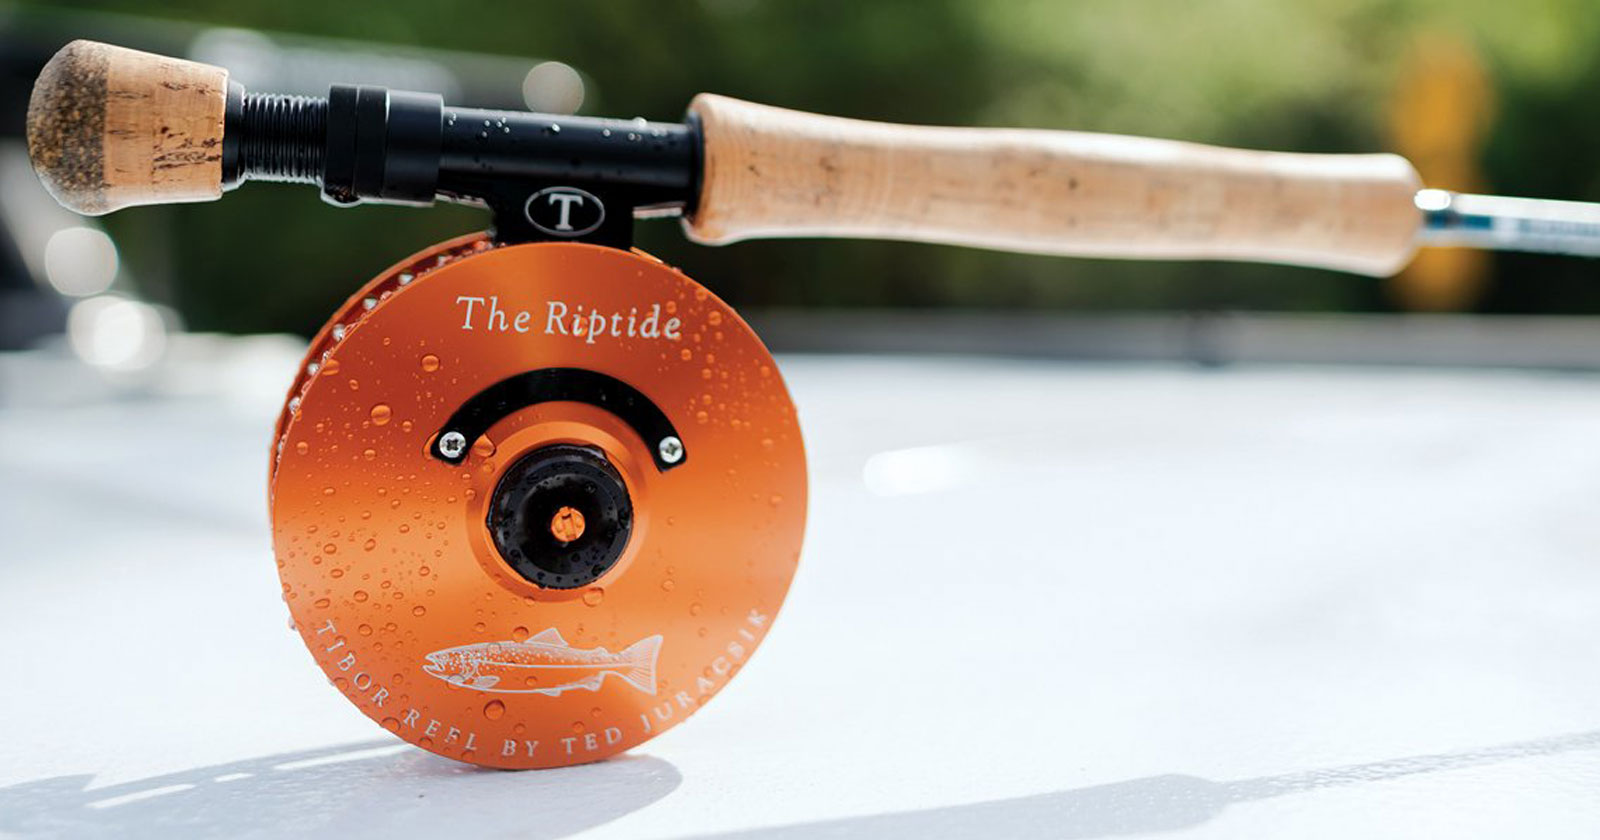 Tibor Signature Series Fly Reel - Spawn Fly Fish– Spawn Fly Fish